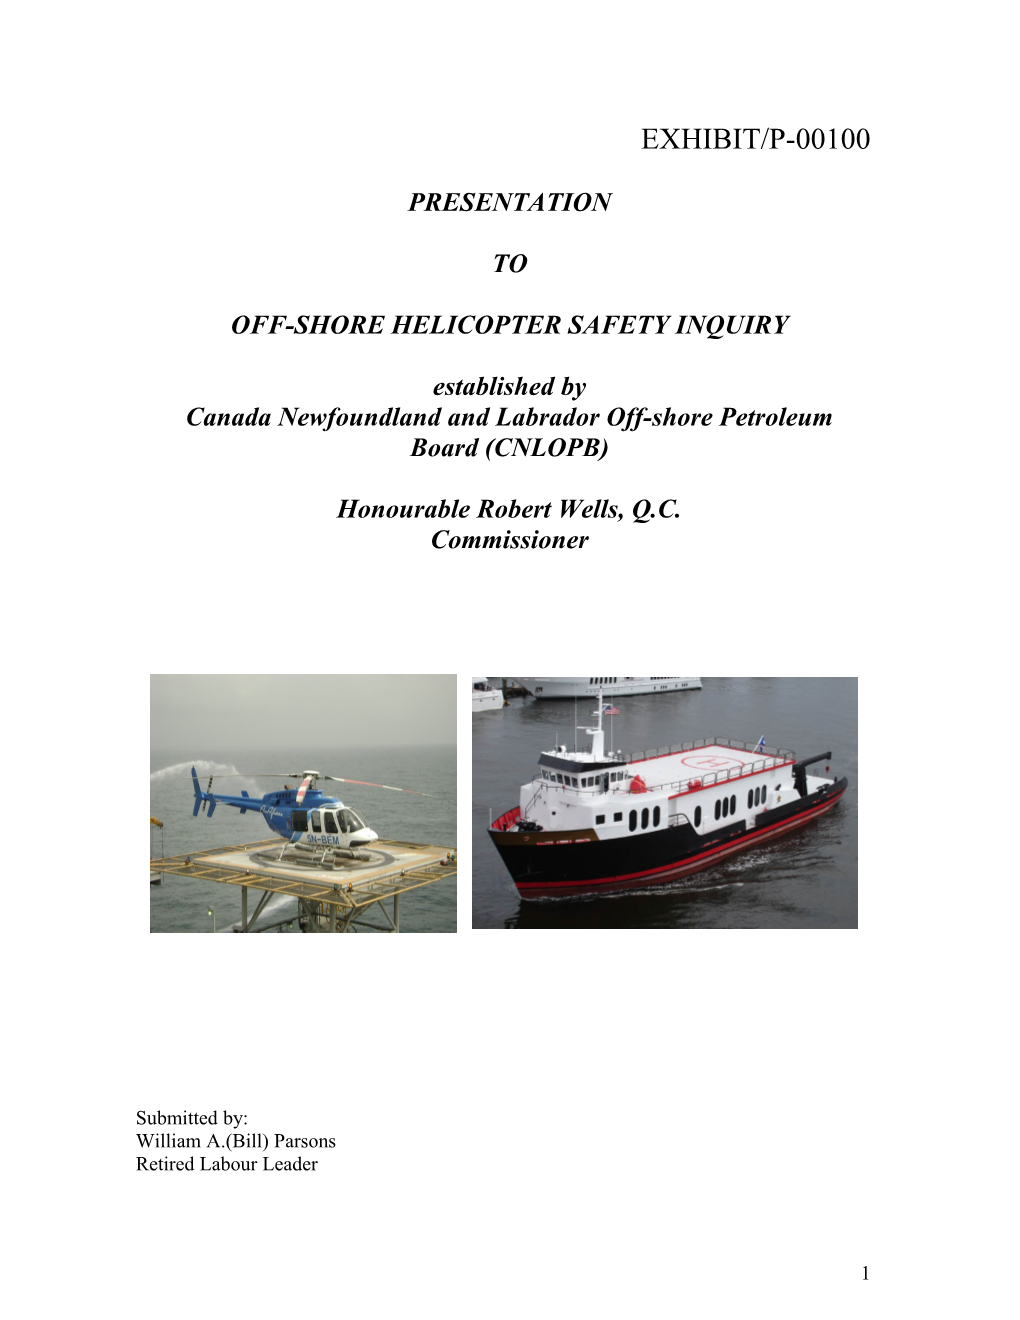 Off-Shore Helicopter Safety Inquiry